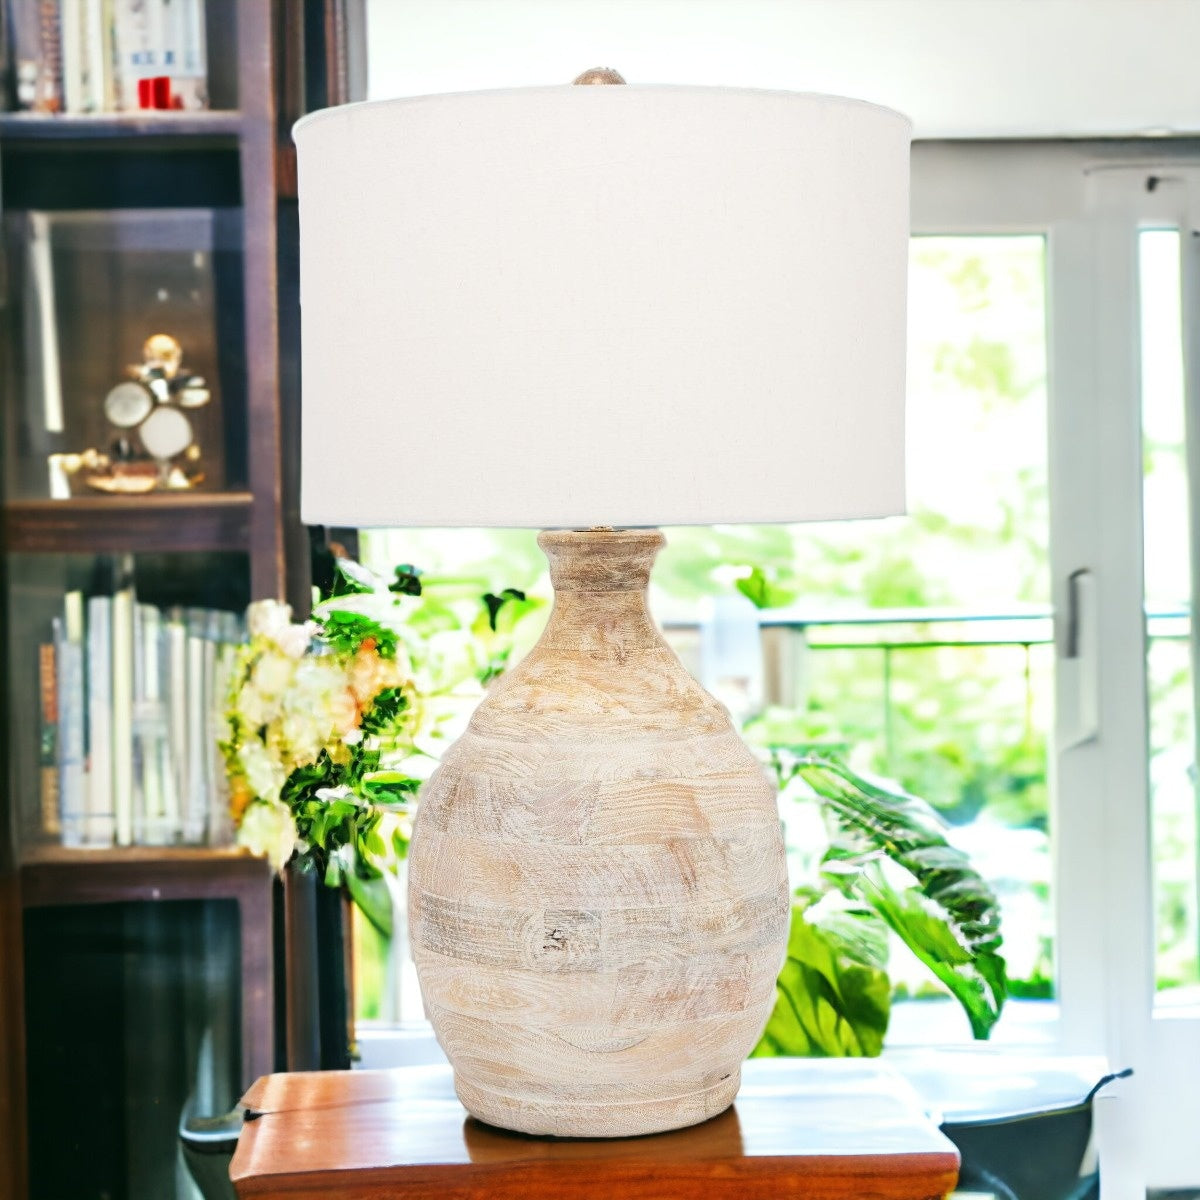 27" Blanched Almond Solid Wood LED Table Lamp With White Drum Shade